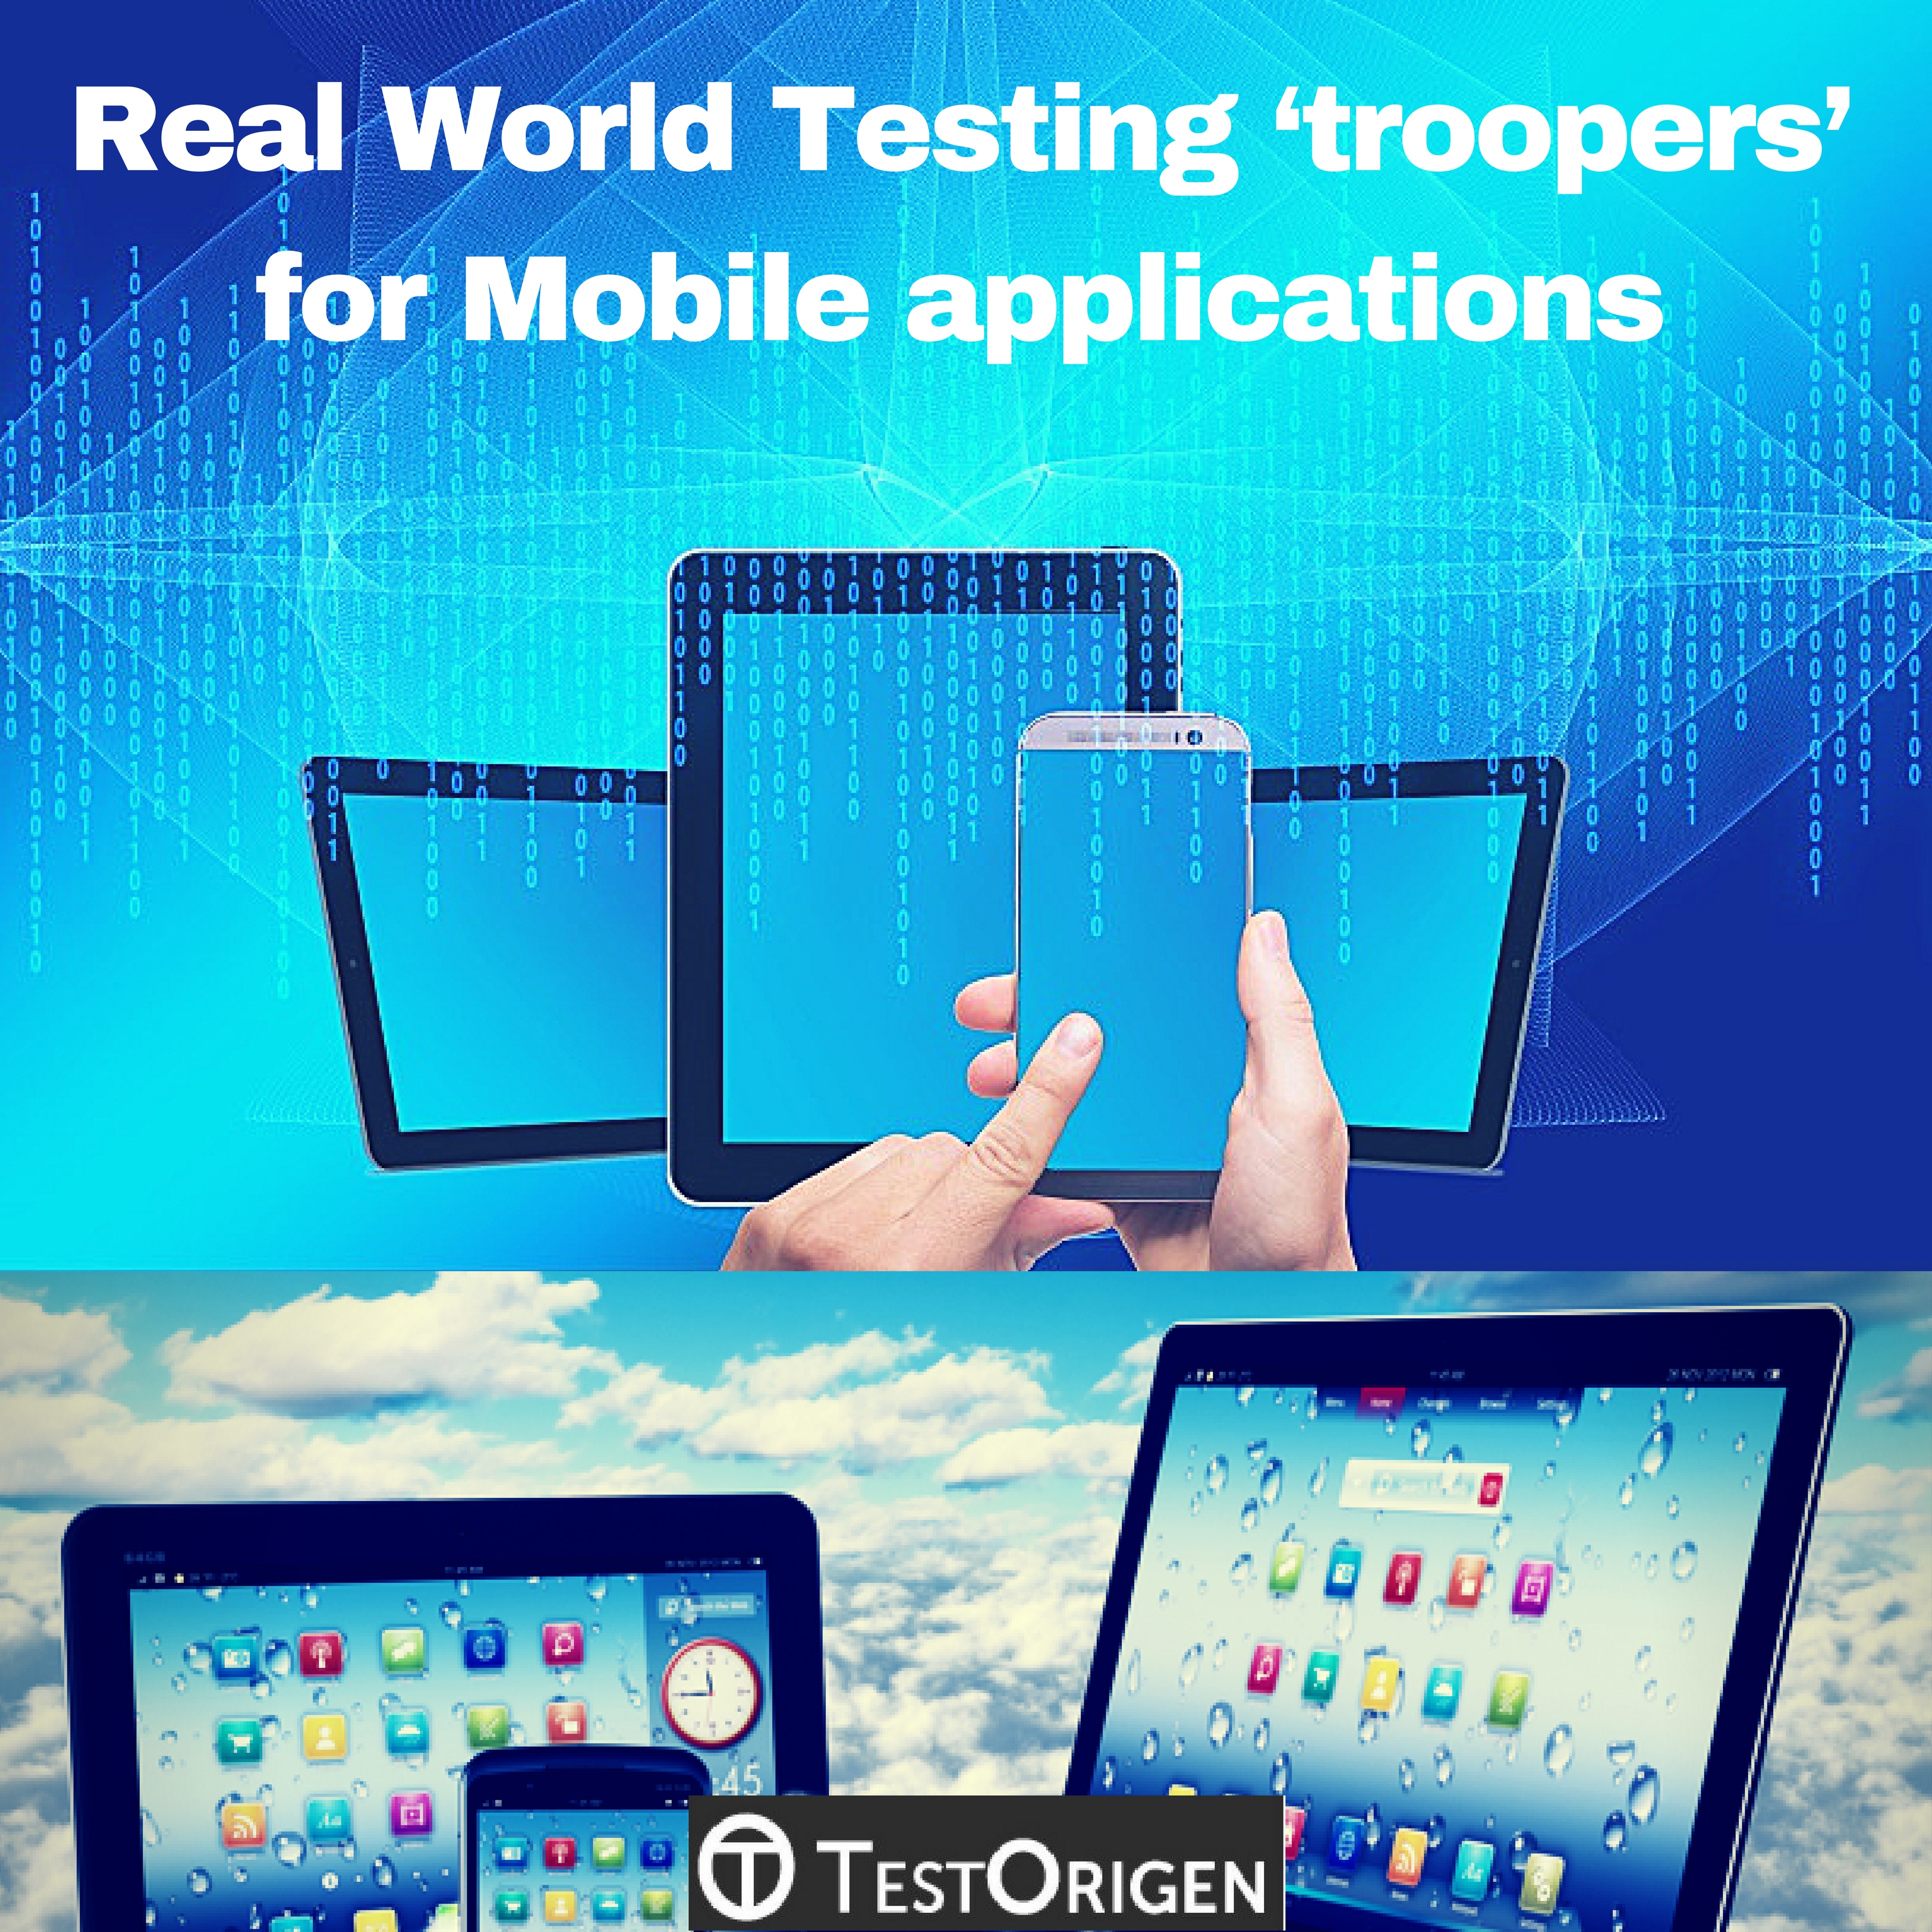 Real World Testing ‘troopers’ for Mobile applications